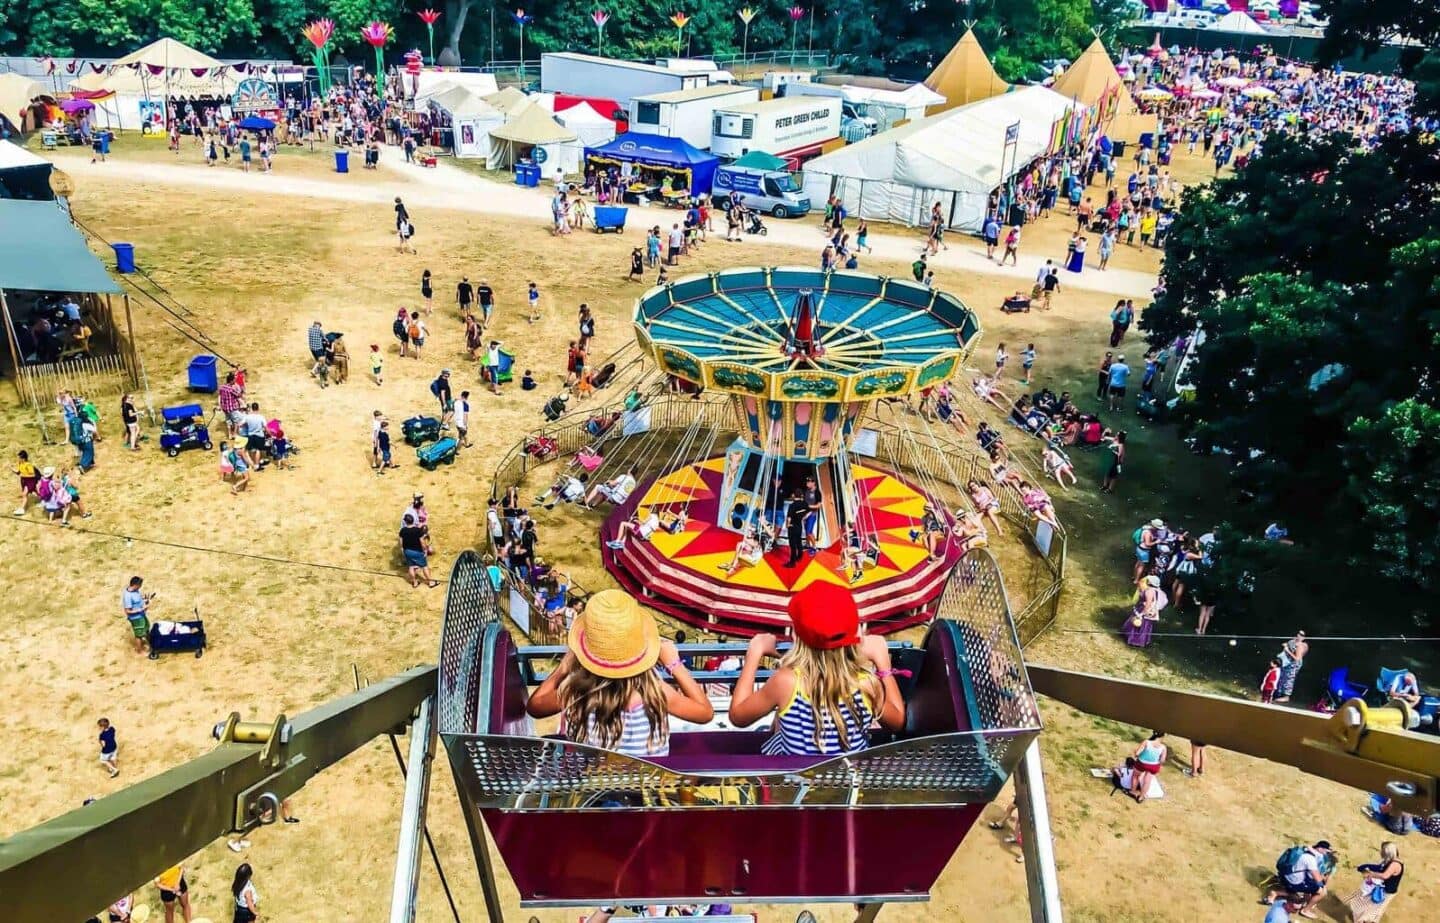 Top Tips if you're heading to Camp Bestival in 2019